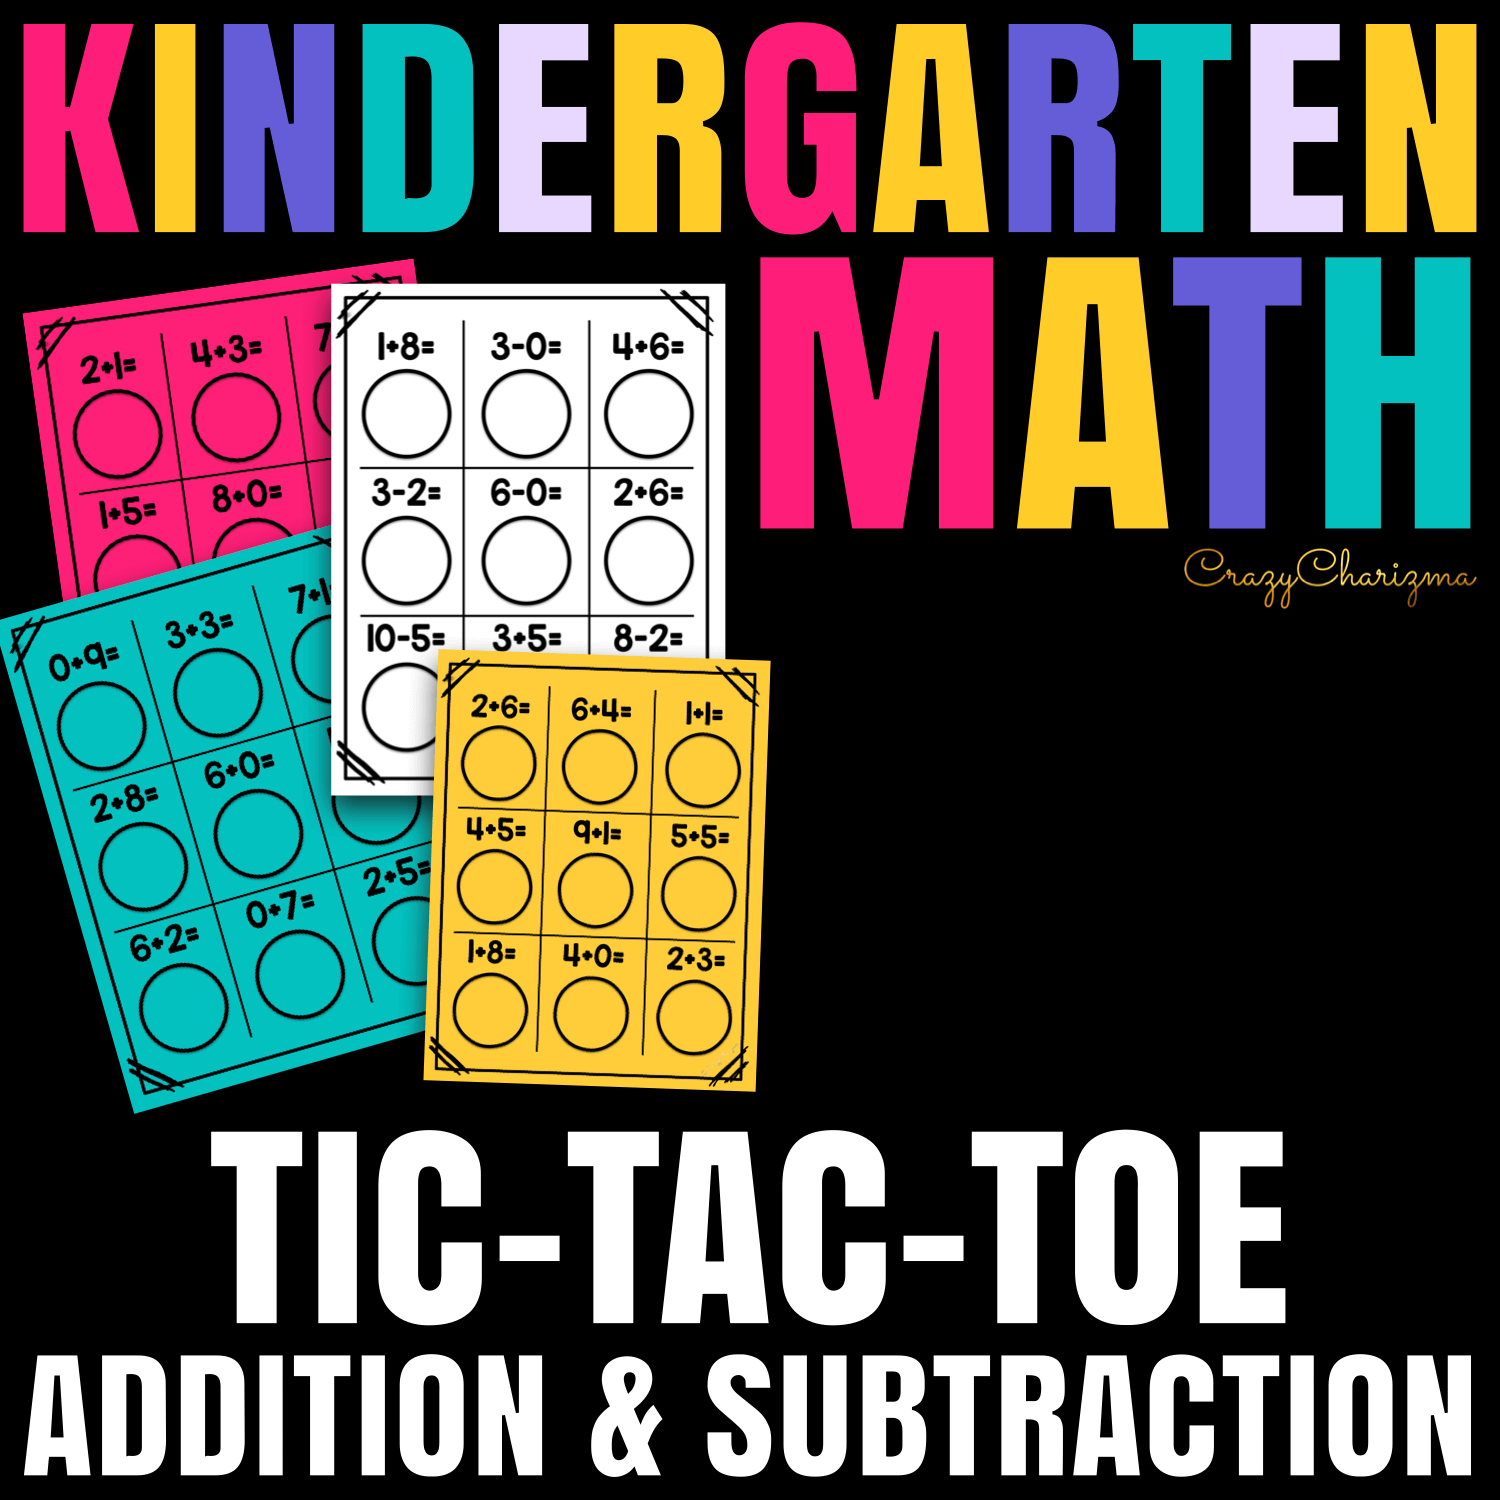 Practice addition and subtraction to 10 with tic-tac-toe activities, kids love them a lot! Find inside 12 pages: cards to practice addition to 10, subtraction within 10, and a mix of both.